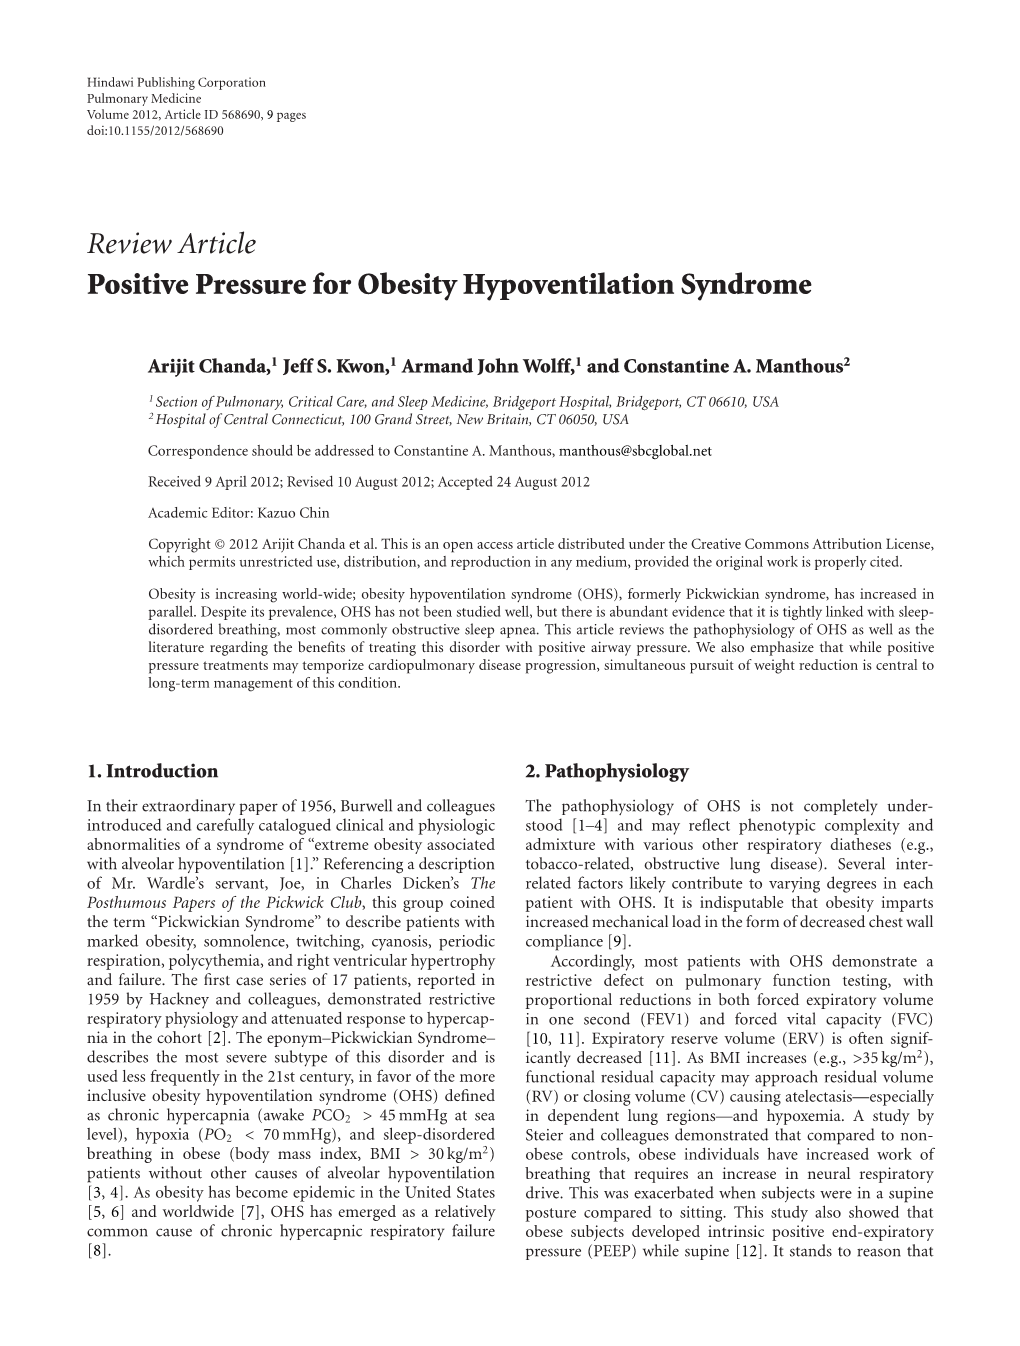 Review Article Positive Pressure for Obesity Hypoventilation Syndrome